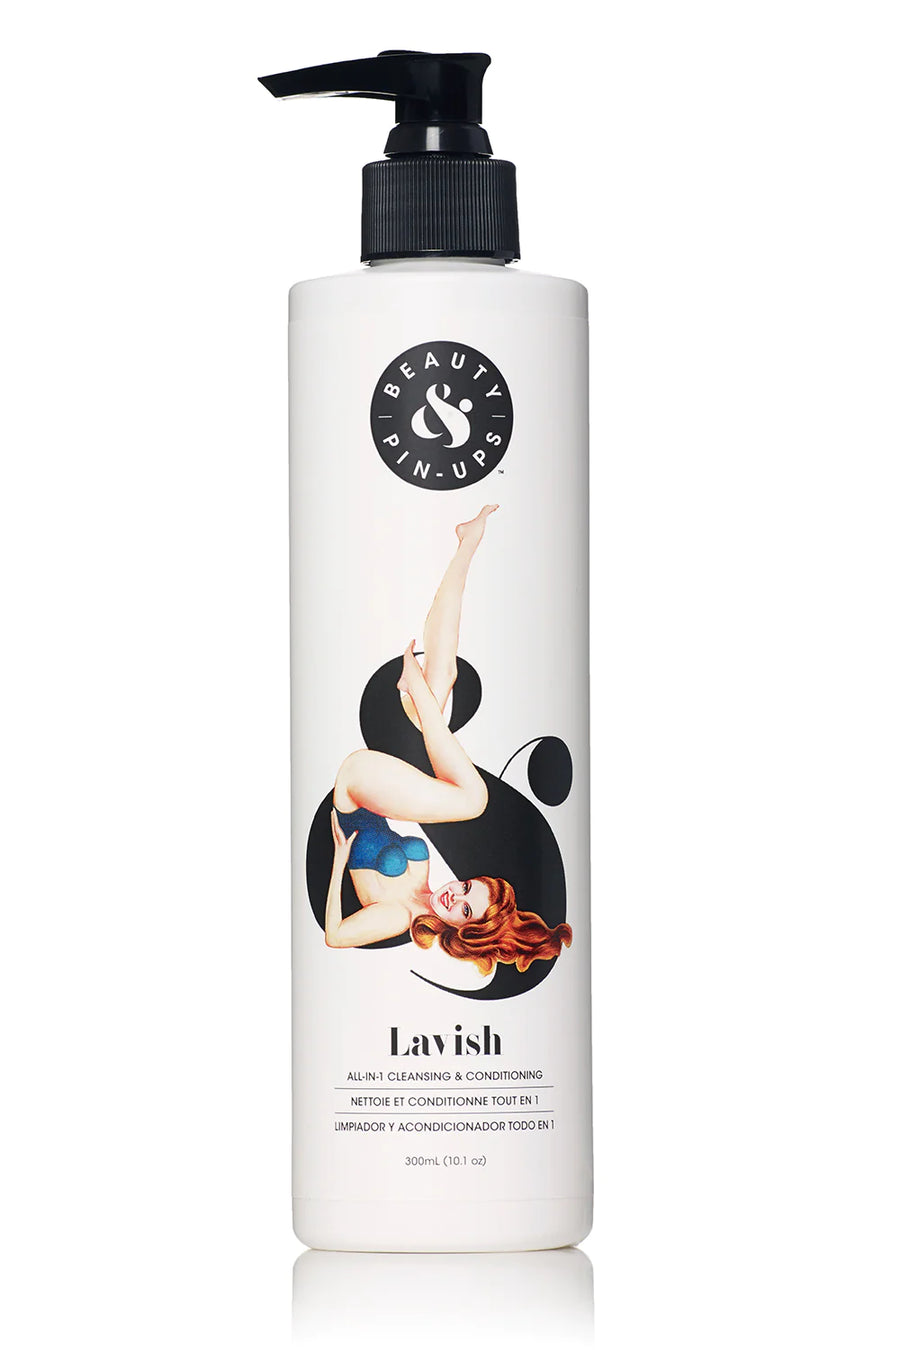 Beauty & Pin Ups Lavish All-In-One Cleansing and Conditioning image of 10.1 oz bottle